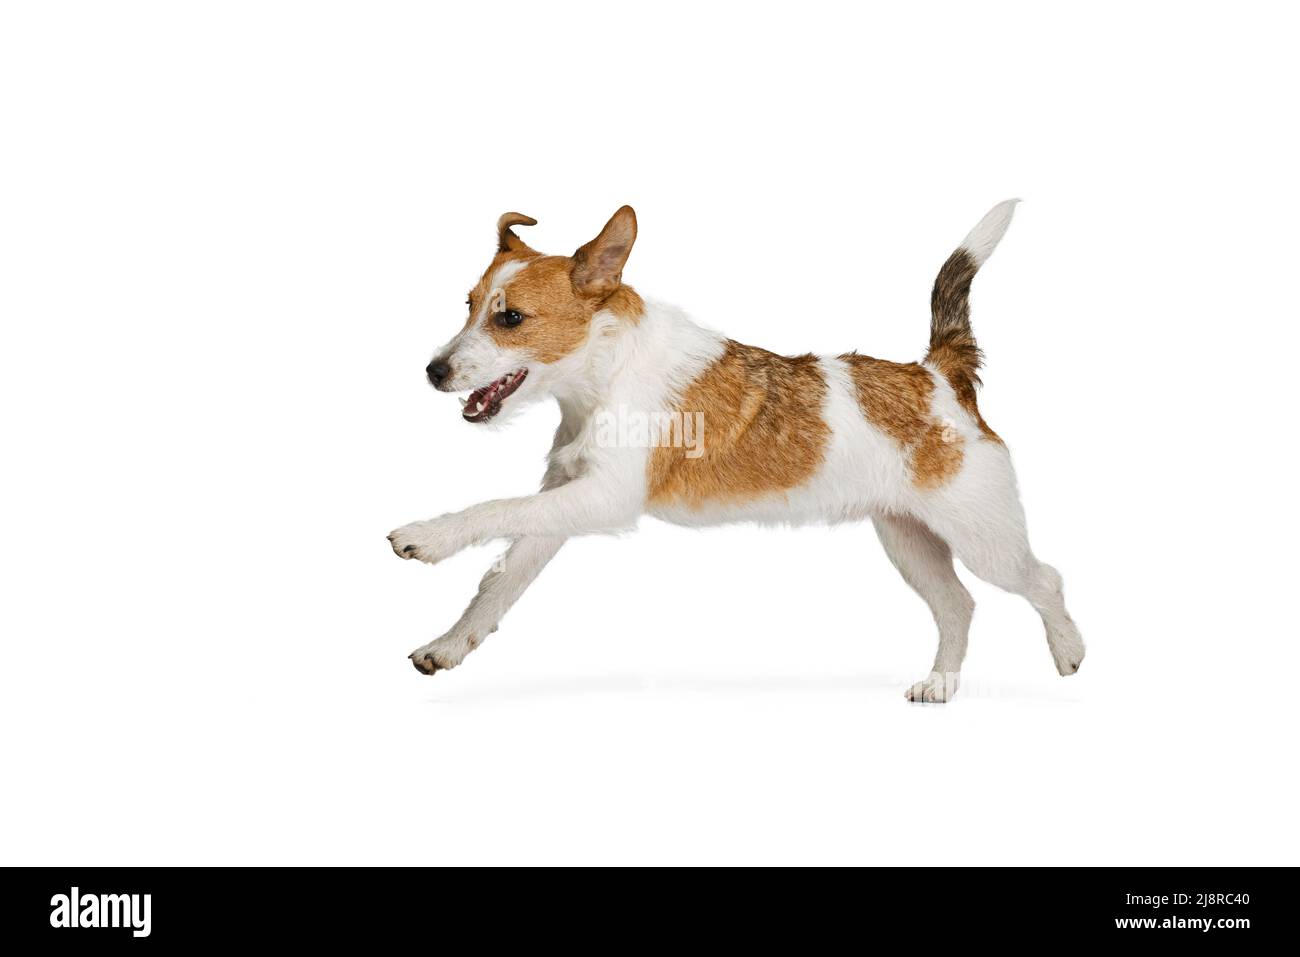 Short-haired Jack russell terrier dog posing isolated on white background. Concept of animal, breed, vet, health and care Stock Photo